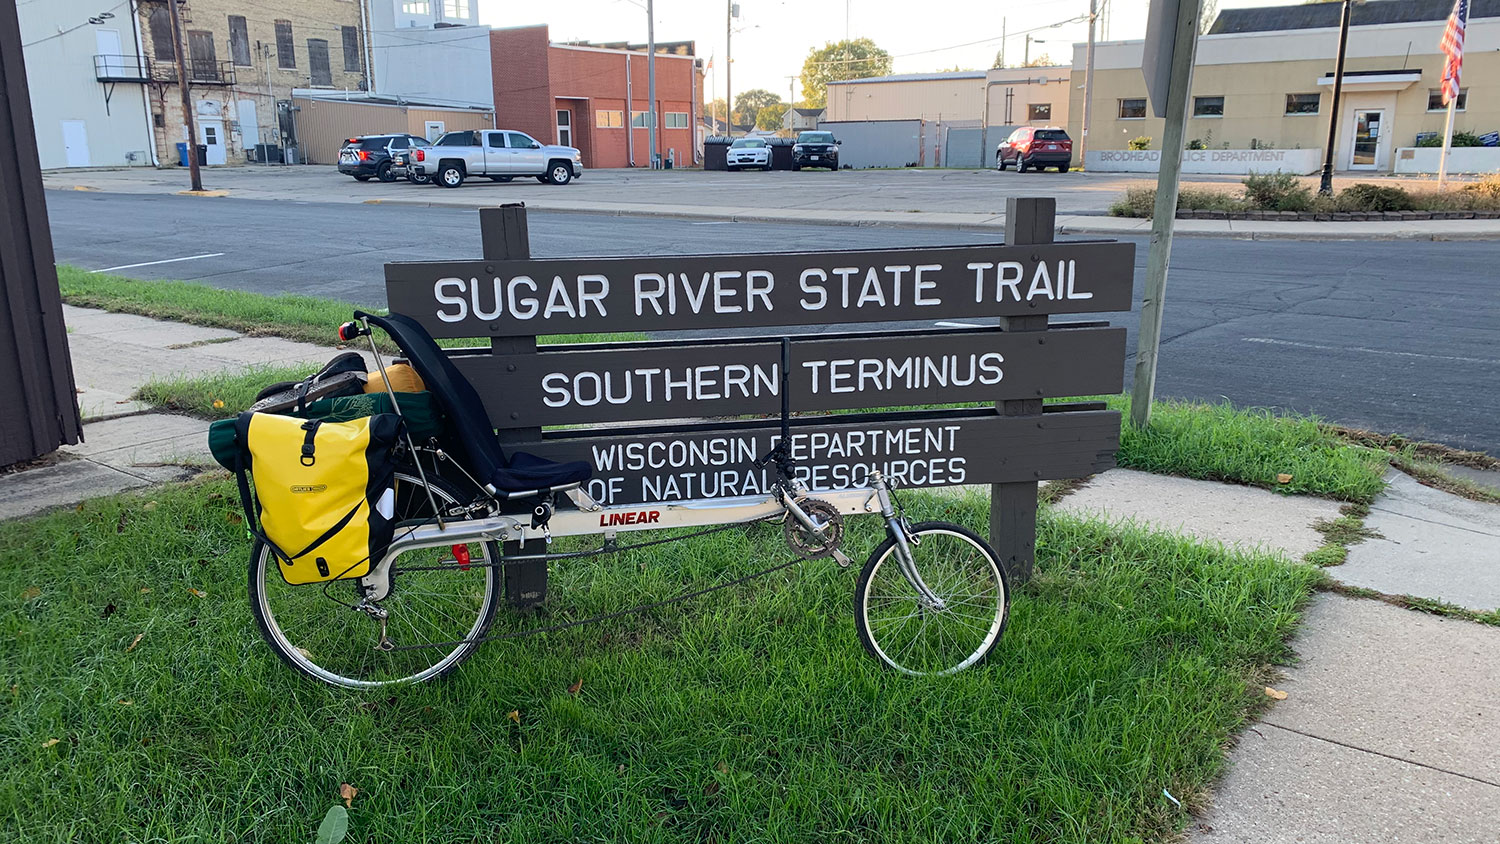 End of the Sugar River Trail